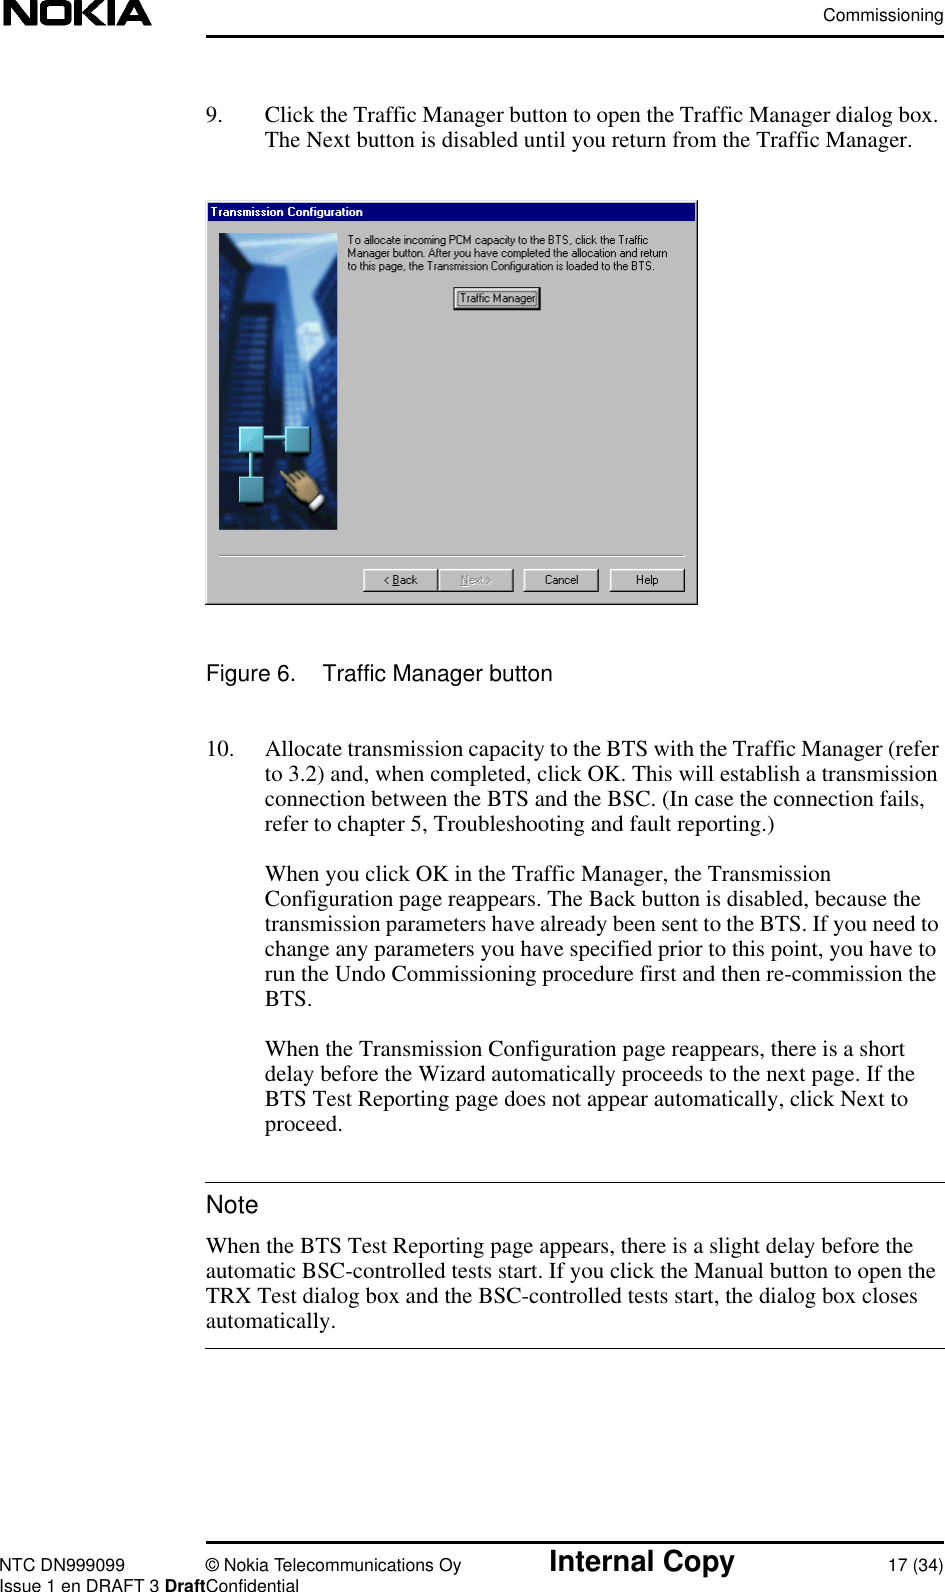 CommissioningNTC DN999099 © Nokia Telecommunications Oy Internal Copy 17 (34)Issue 1 en DRAFT 3 DraftConfidentialNote9. Click the Traffic Manager button to open the Traffic Manager dialog box.The Next button is disabled until you return from the Traffic Manager.Figure 6. Traffic Manager button10. Allocate transmission capacity to the BTS with the Traffic Manager (referto 3.2) and, when completed, click OK. This will establish a transmissionconnection between the BTS and the BSC. (In case the connection fails,refer to chapter 5, Troubleshooting and fault reporting.)When you click OK in the Traffic Manager, the TransmissionConfiguration page reappears. The Back button is disabled, because thetransmission parameters have already been sent to the BTS. If you need tochange any parameters you have specified prior to this point, you have torun the Undo Commissioning procedure first and then re-commission theBTS.When the Transmission Configuration page reappears, there is a shortdelay before the Wizard automatically proceeds to the next page. If theBTS Test Reporting page does not appear automatically, click Next toproceed.When the BTS Test Reporting page appears, there is a slight delay before theautomatic BSC-controlled tests start. If you click the Manual button to open theTRX Test dialog box and the BSC-controlled tests start, the dialog box closesautomatically.